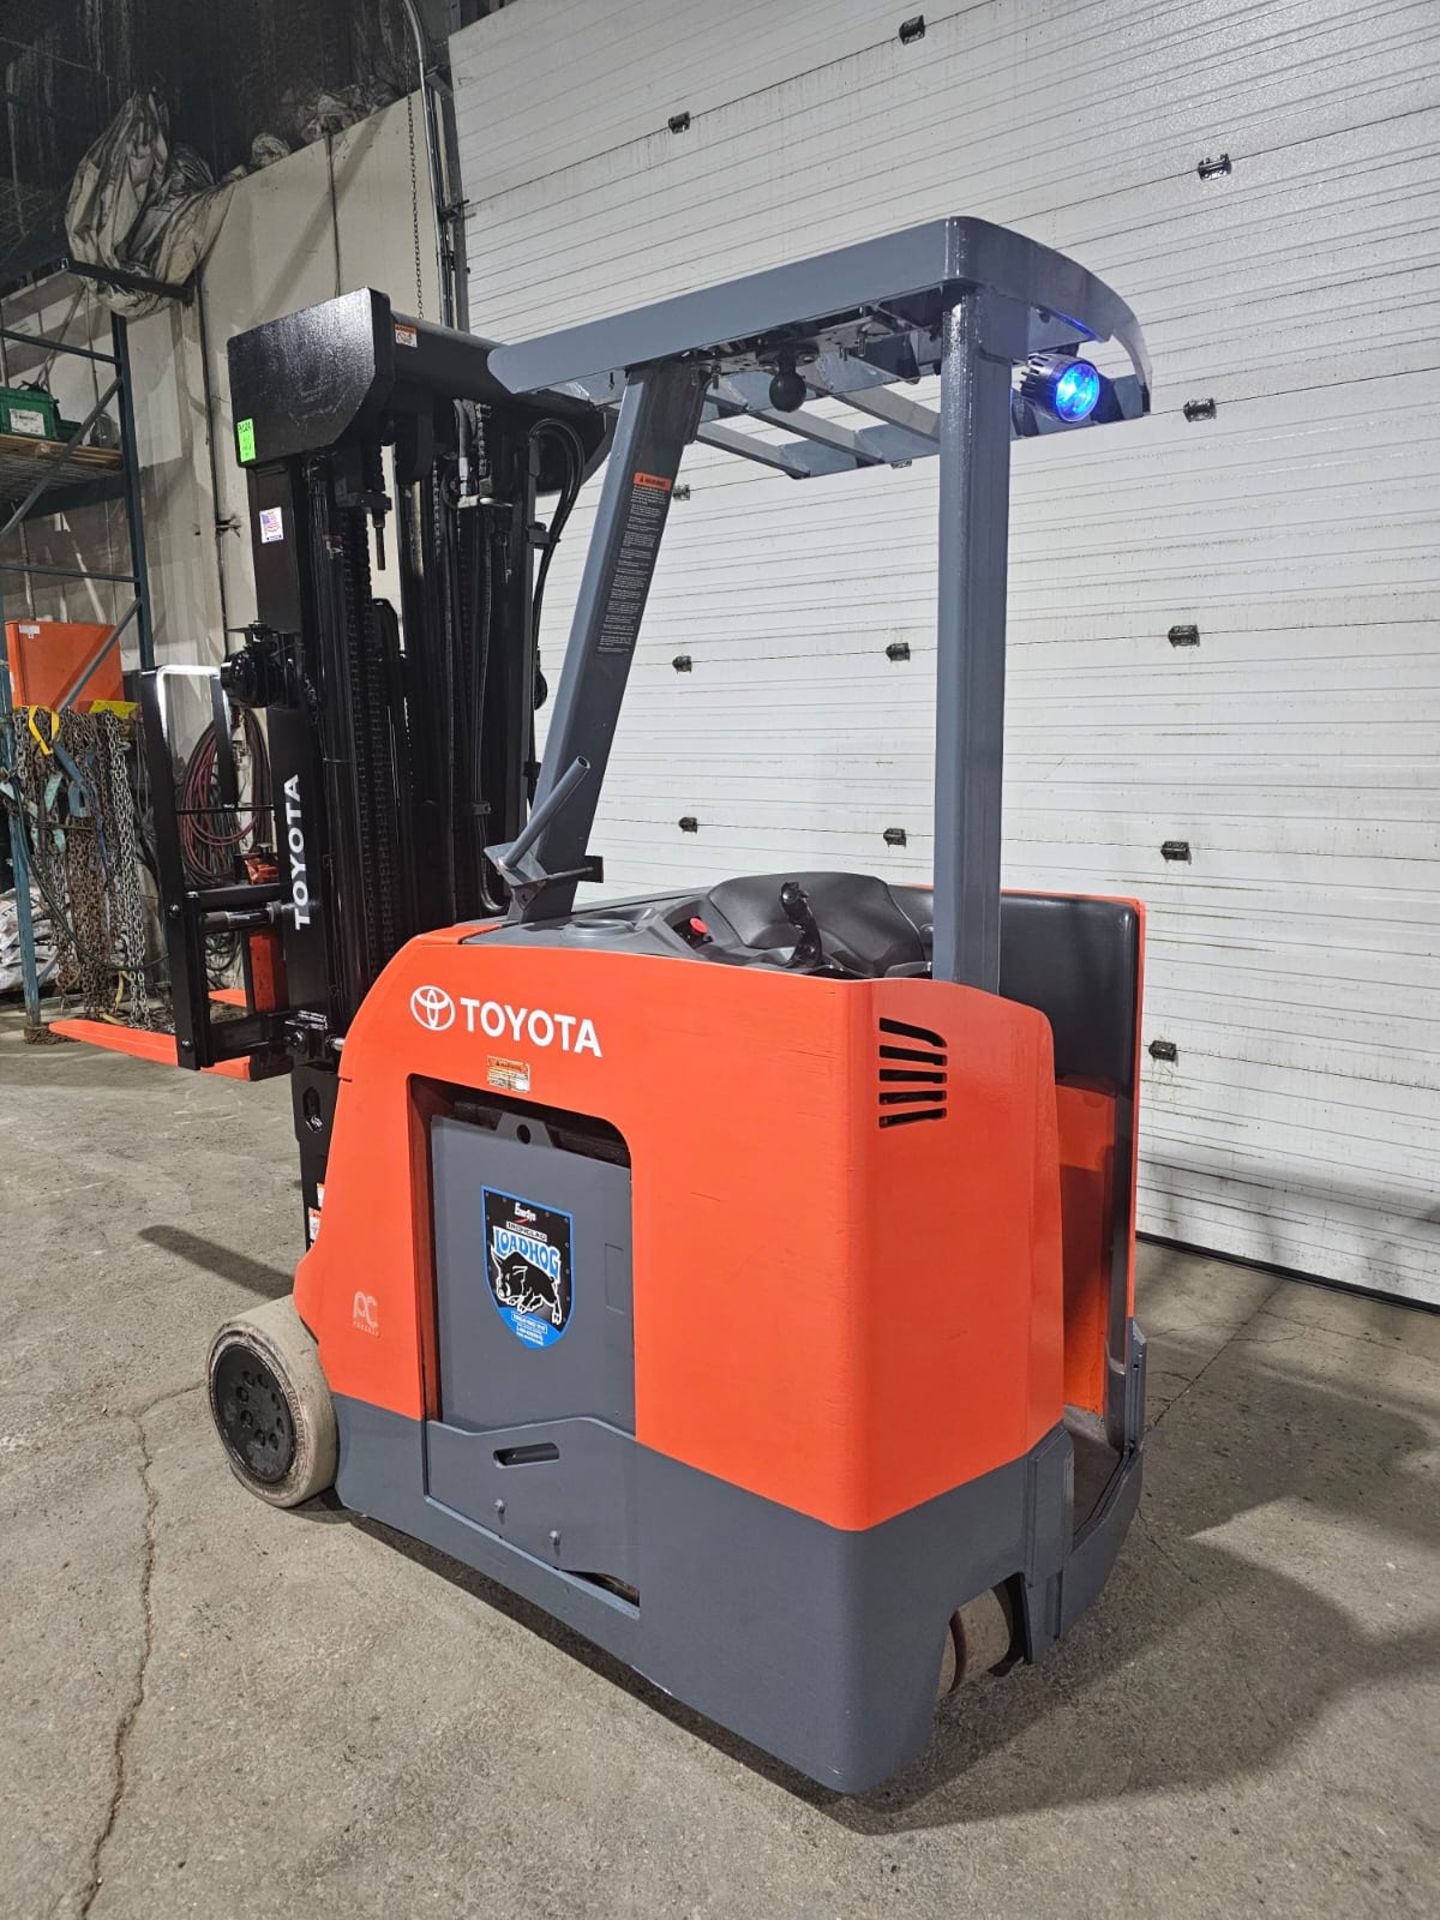 2017 Toyota 4,000lbs Capacity Electric Forklift with 4-STAGE Mast, 276" load height sideshift - Image 2 of 7